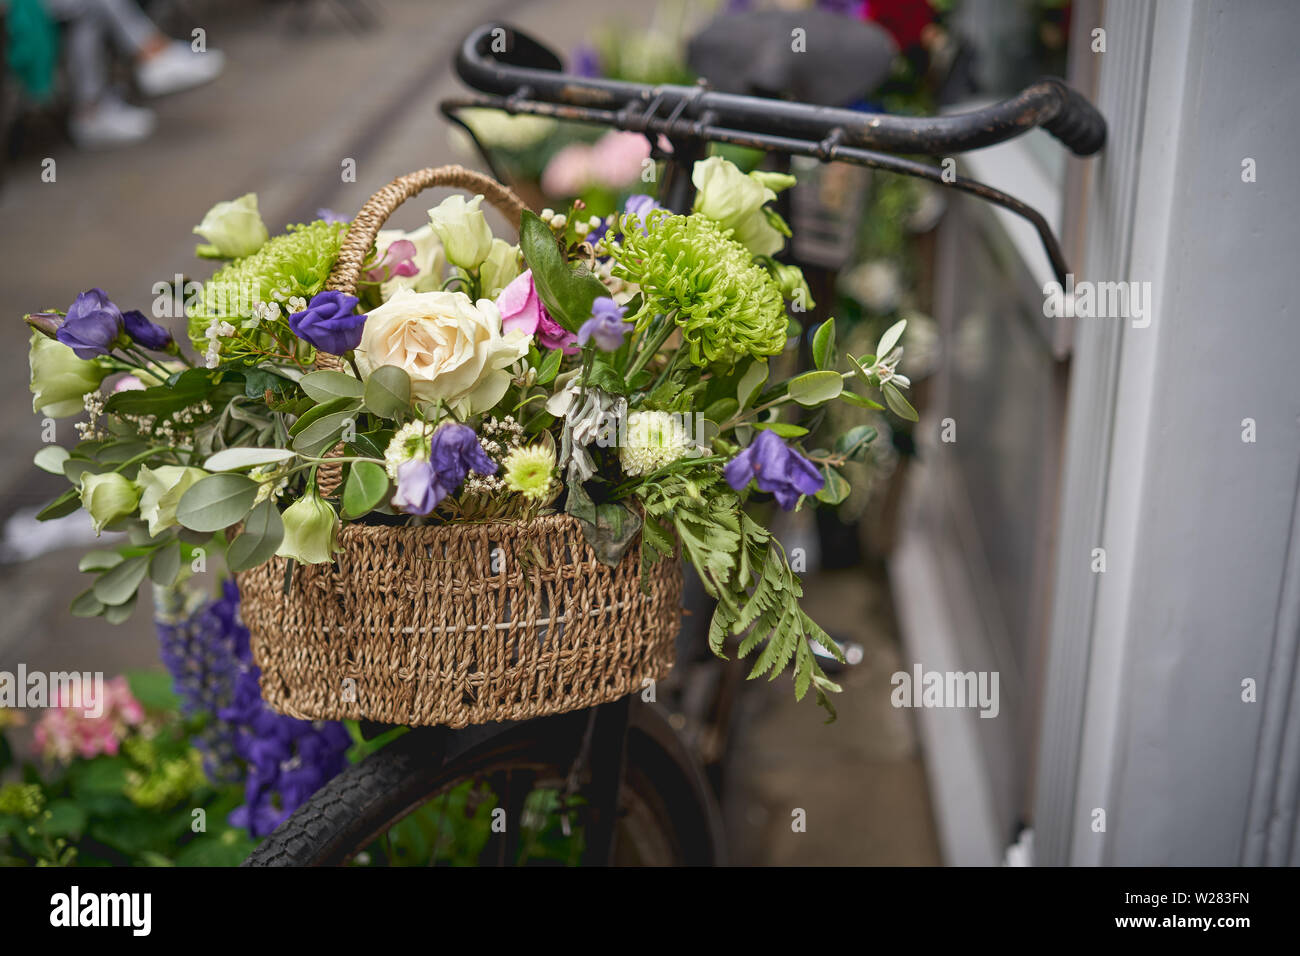 Detail of a parked vintage black bicycle with a bunch of fresh flowers in the front wooden basket. Landscape format. Stock Photo